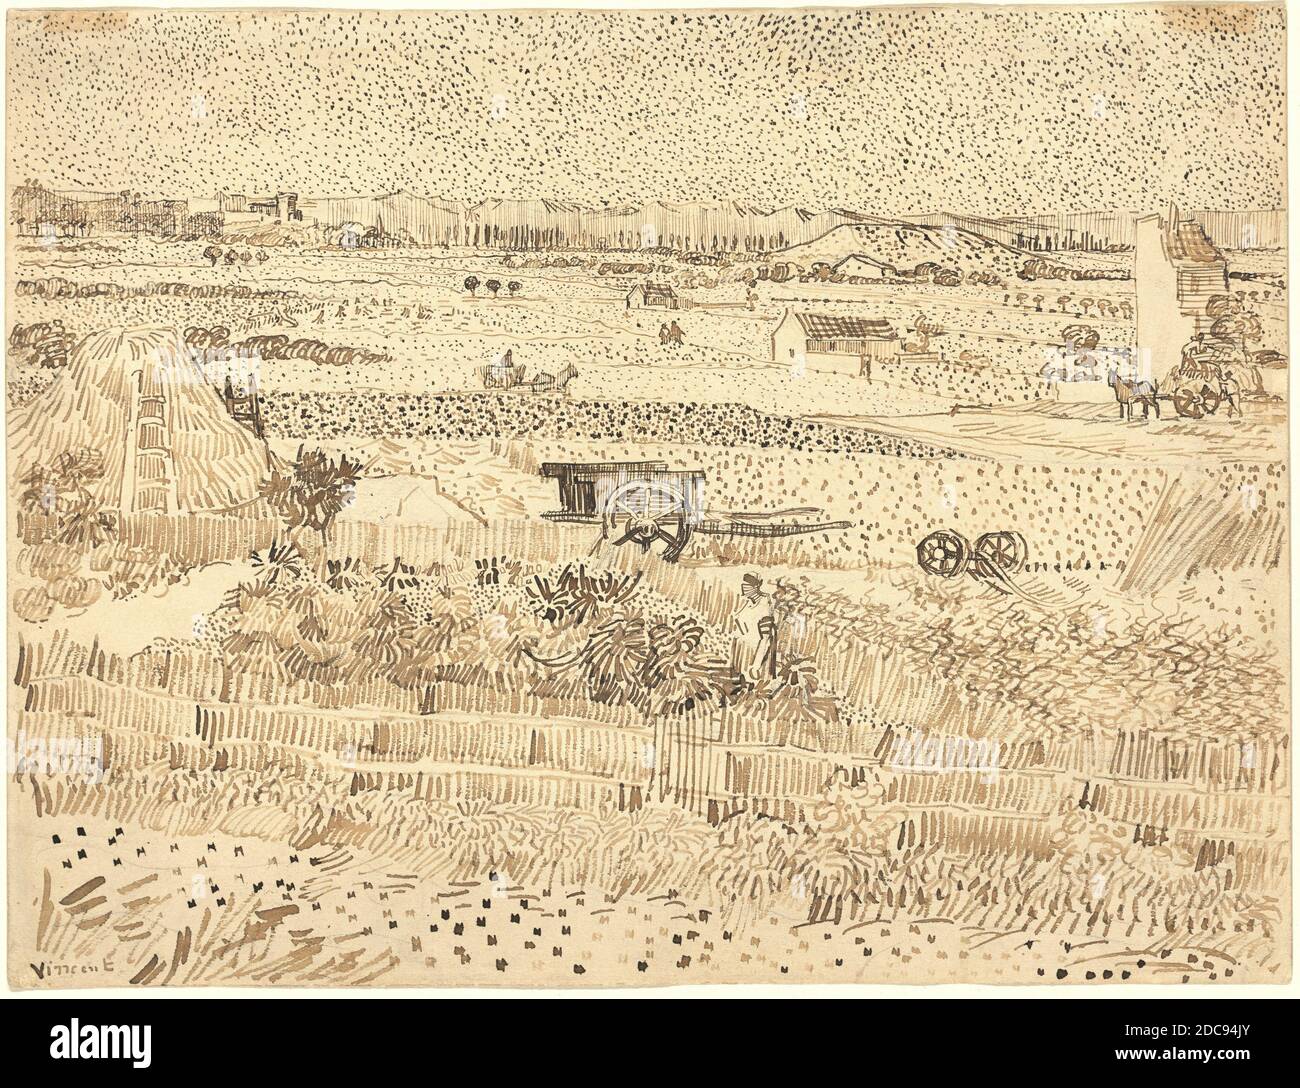 Vincent van Gogh, (artist), Dutch, 1853 - 1890, Harvest--The Plain of La Crau, 1888, reed pen and brown ink over graphite on wove paper, overall: 24.2 x 31.9 cm (9 1/2 x 12 9/16 in Stock Photo